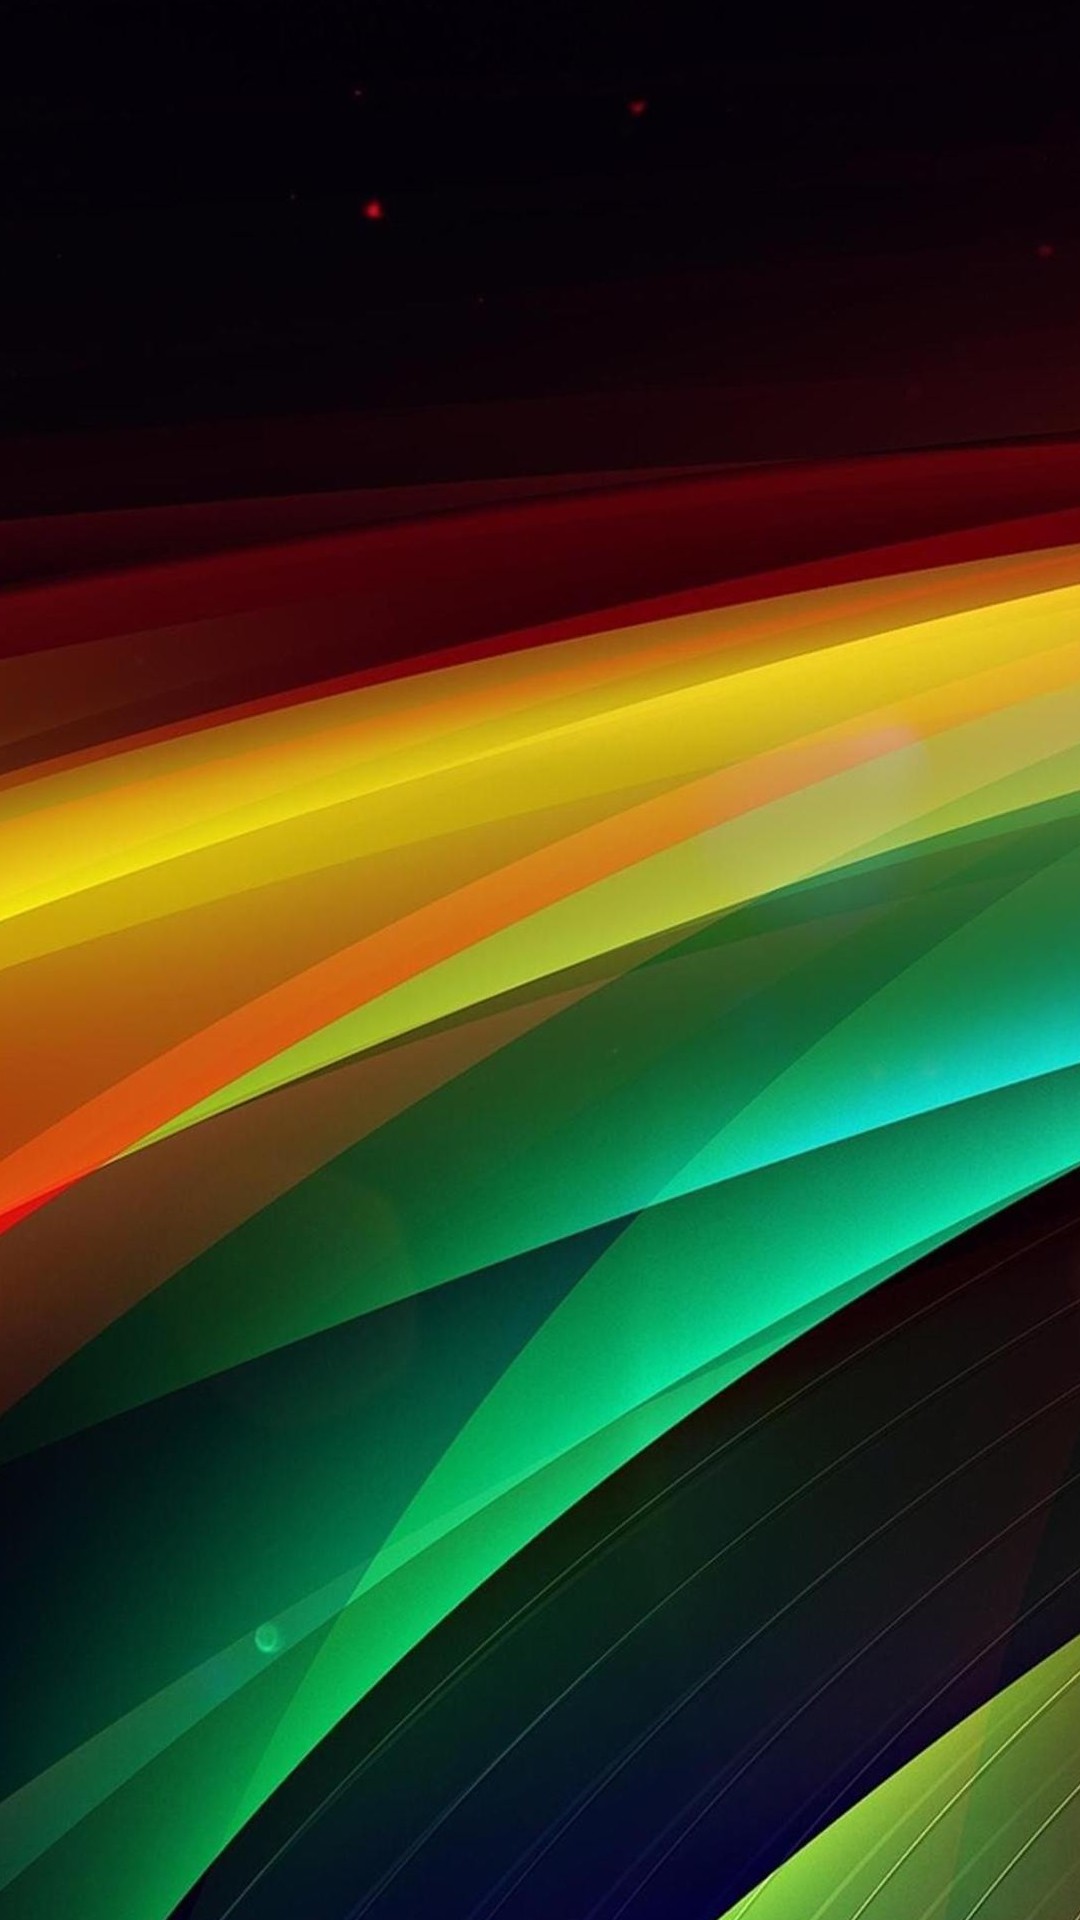 Abstract Xperia Z Wallpapers HD 191, Xperia Z1, ZL Wallpapers and other